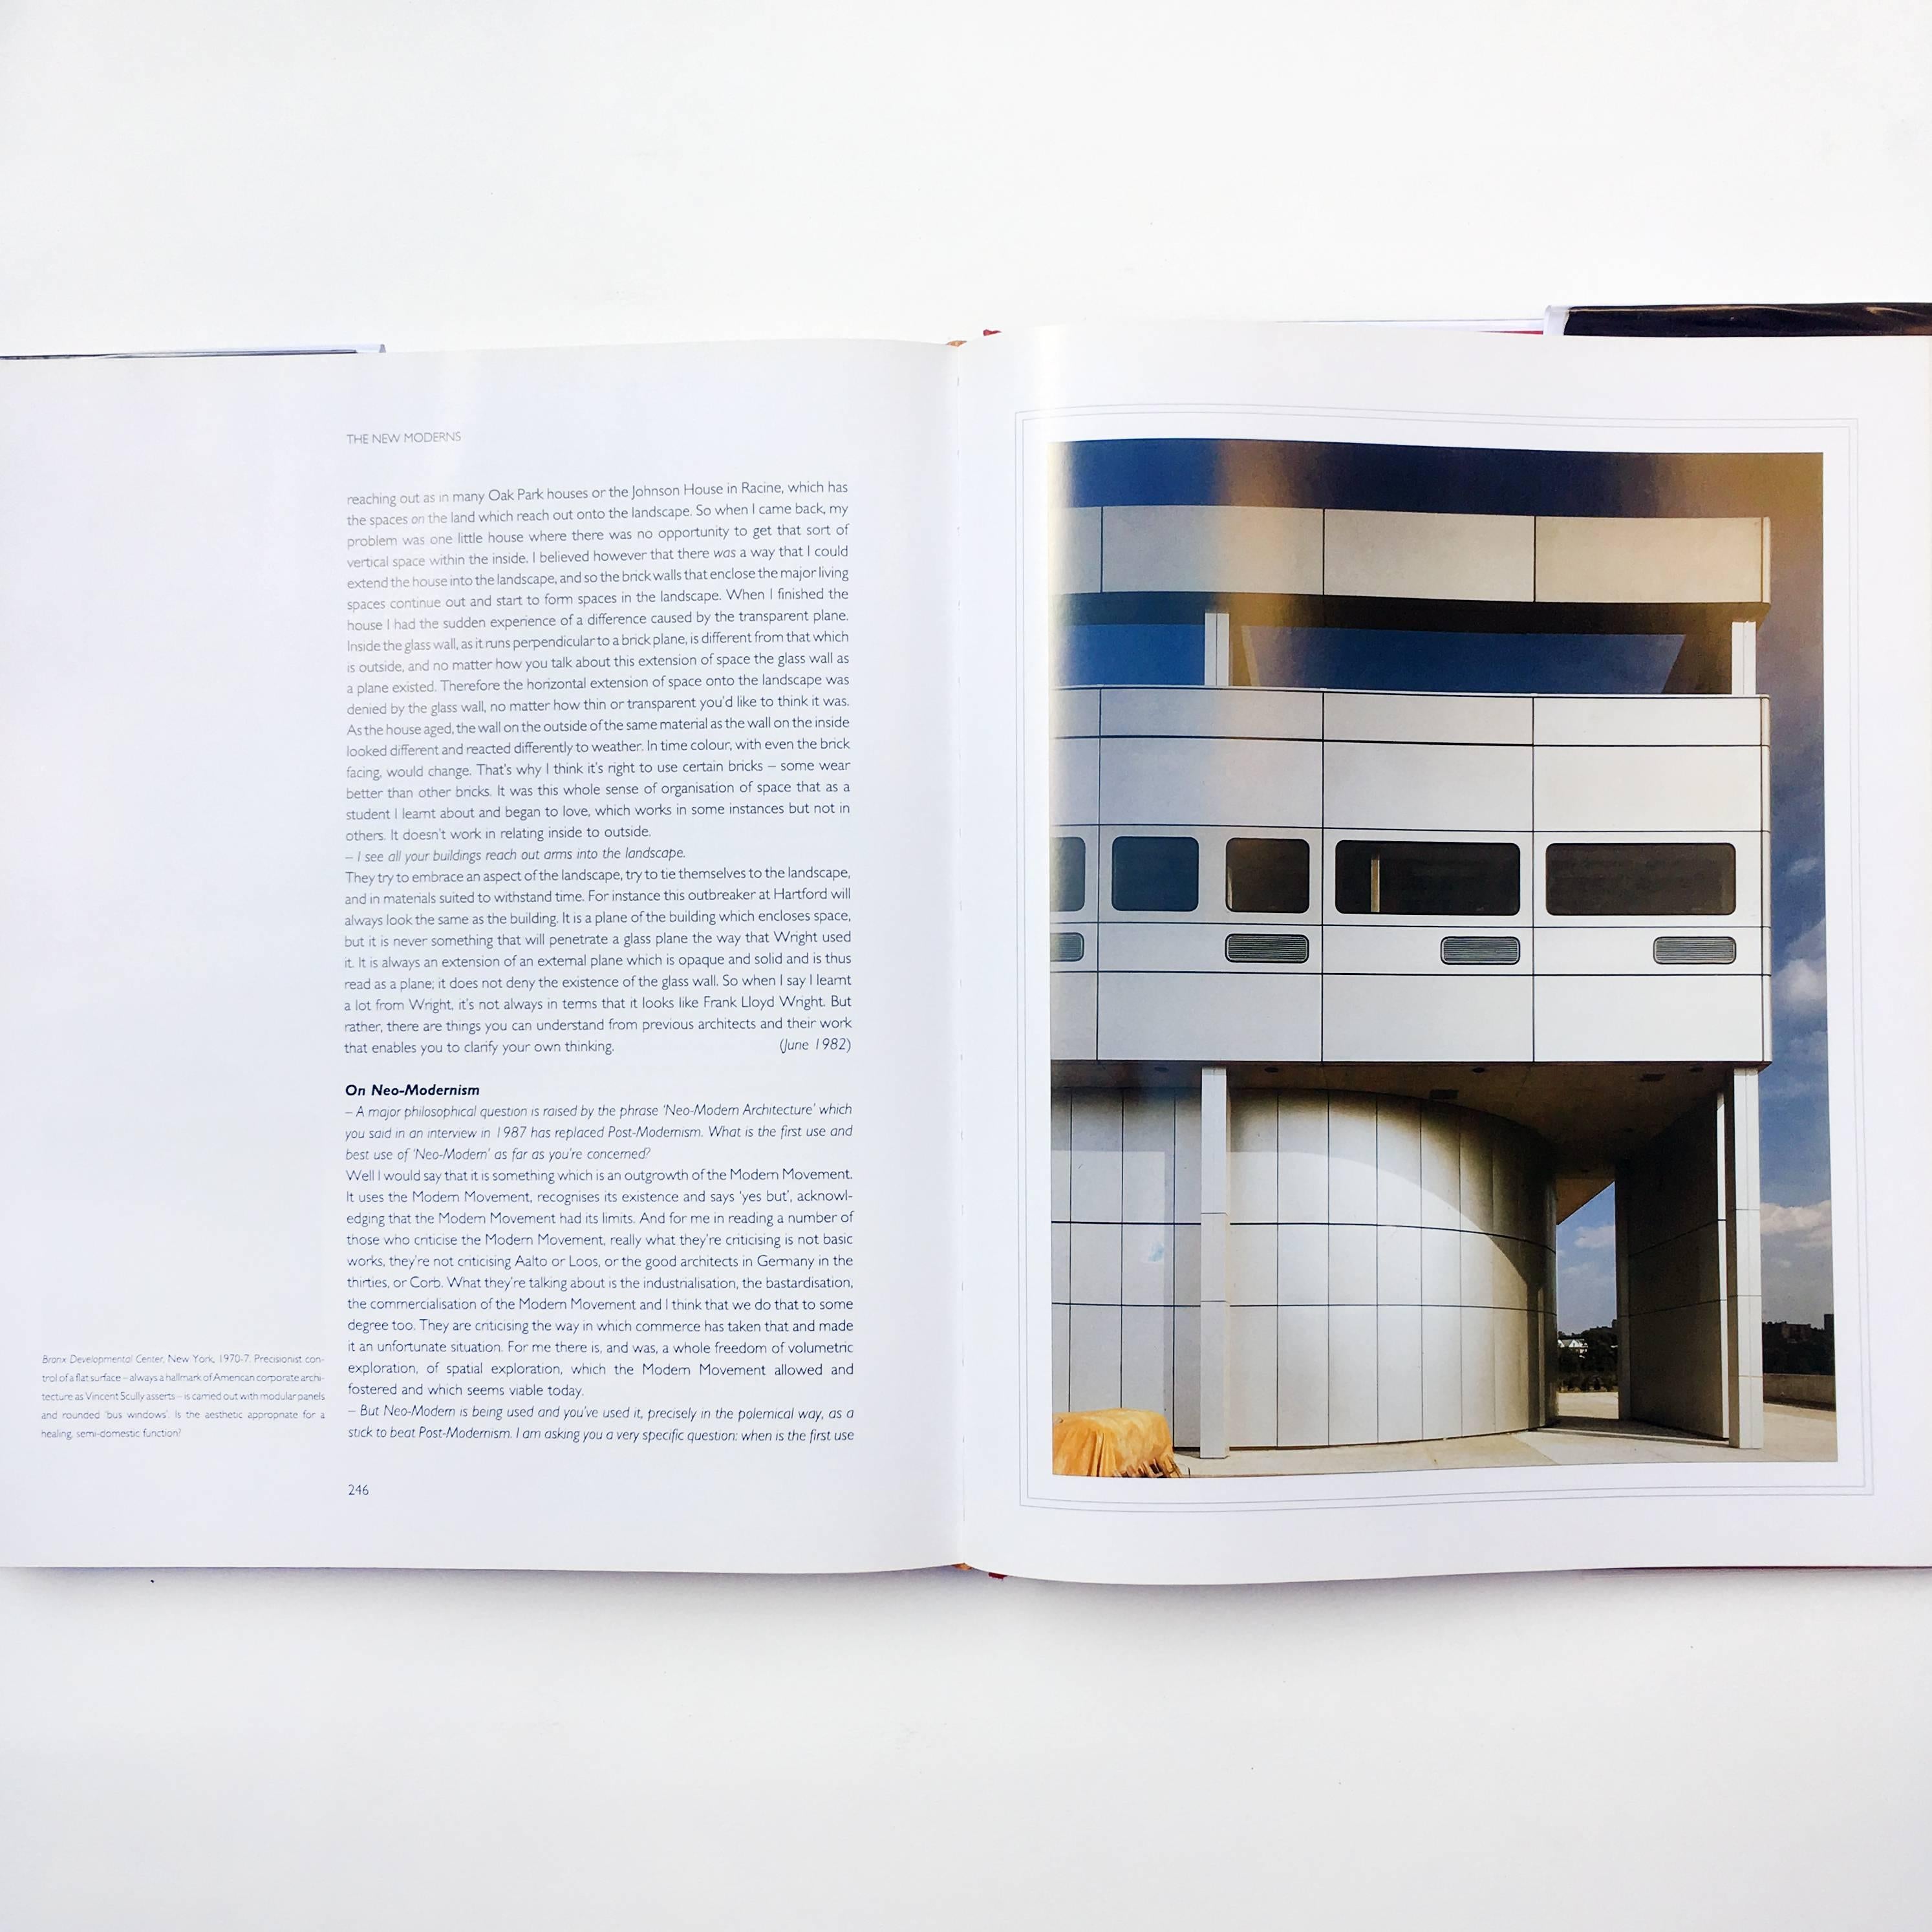 The New Moderns: From Late to Neo-Modernism - Charles Jencks - Academy, 1990 1